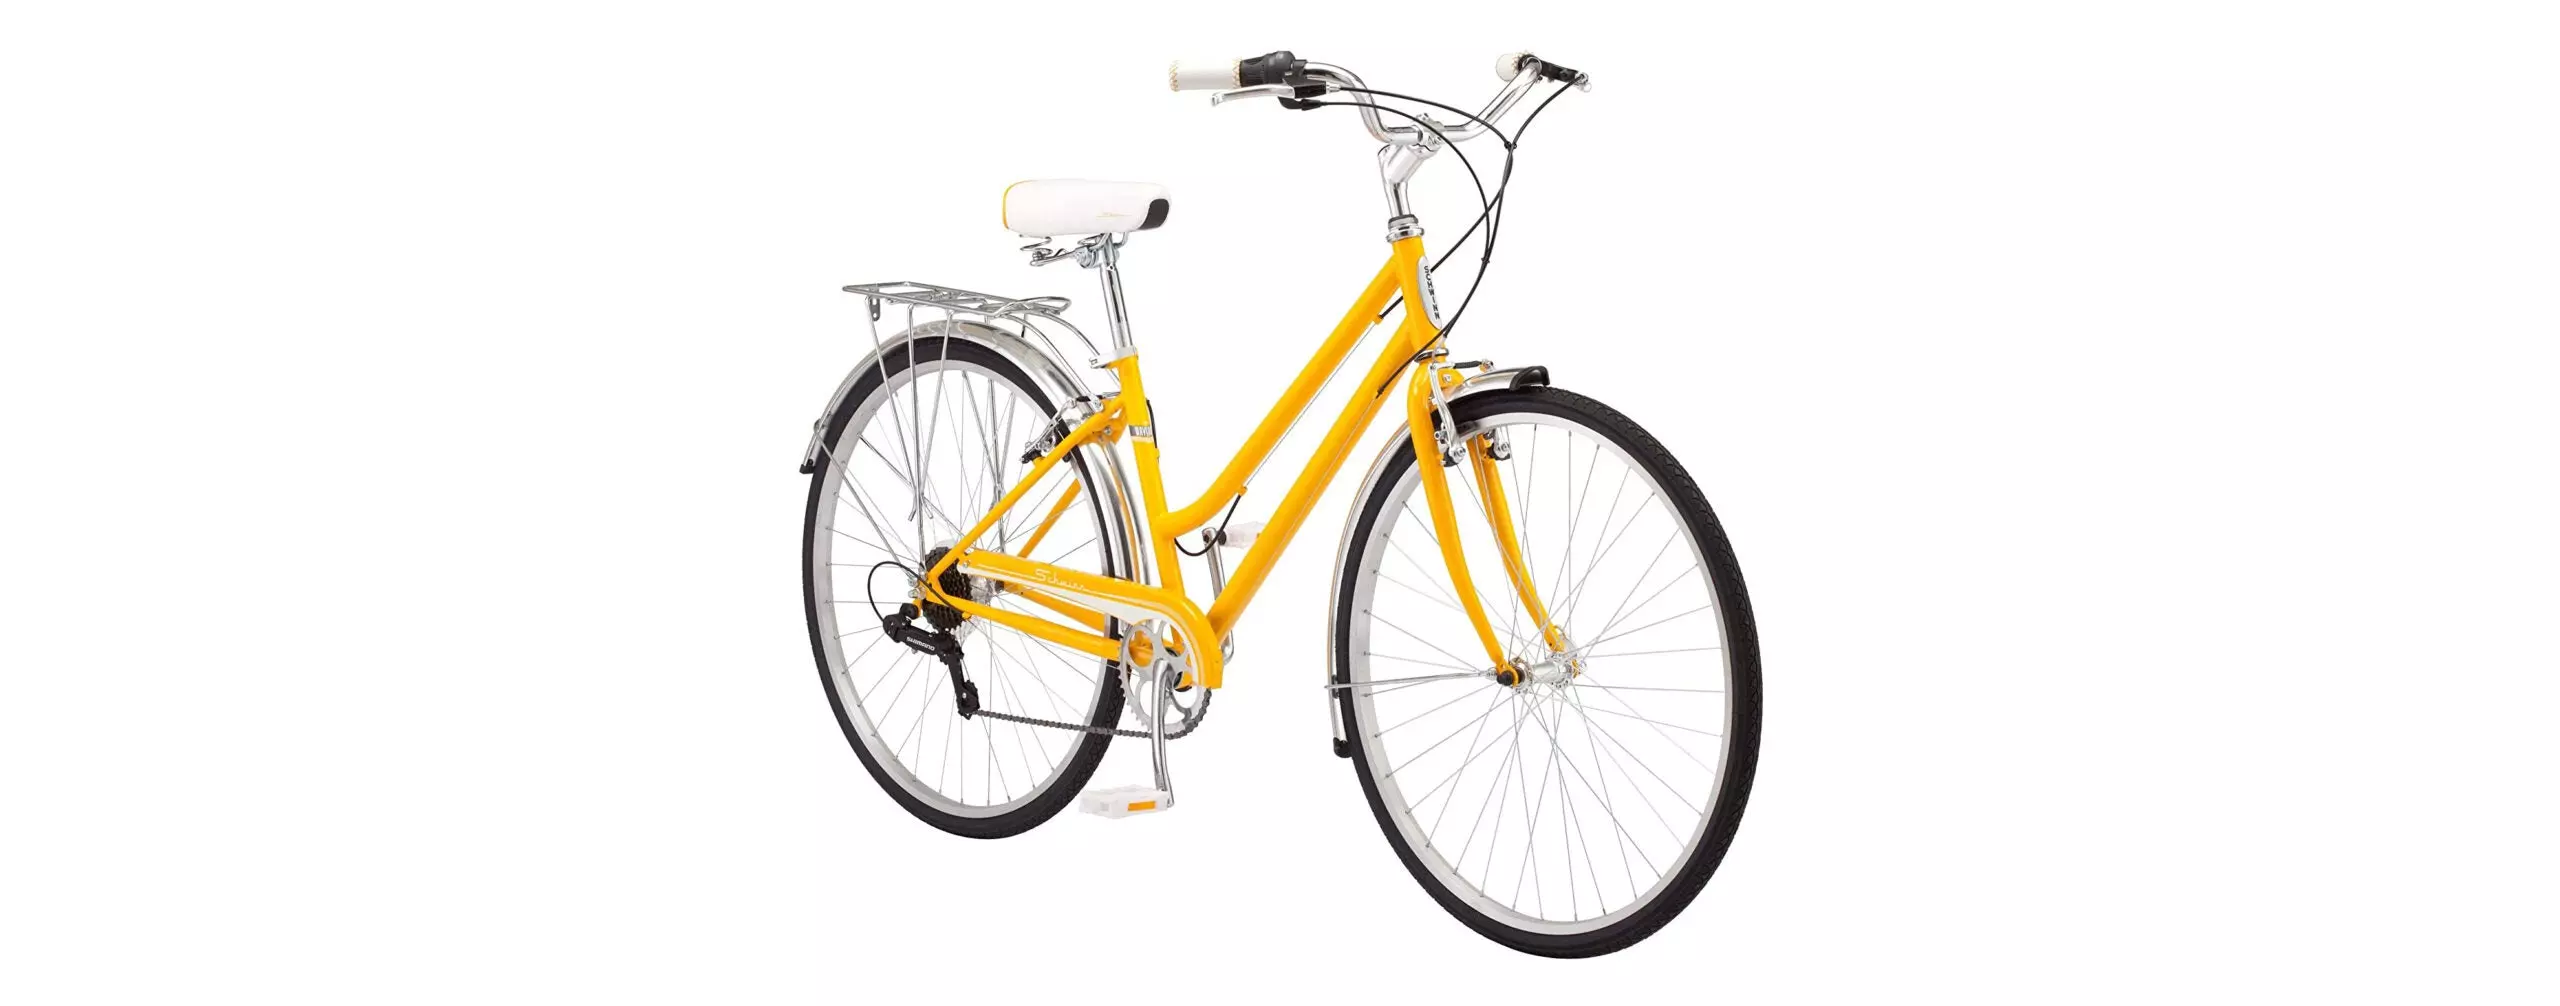 The Best Women’s Comfort Bike (Review and Buying Guide) in 2022